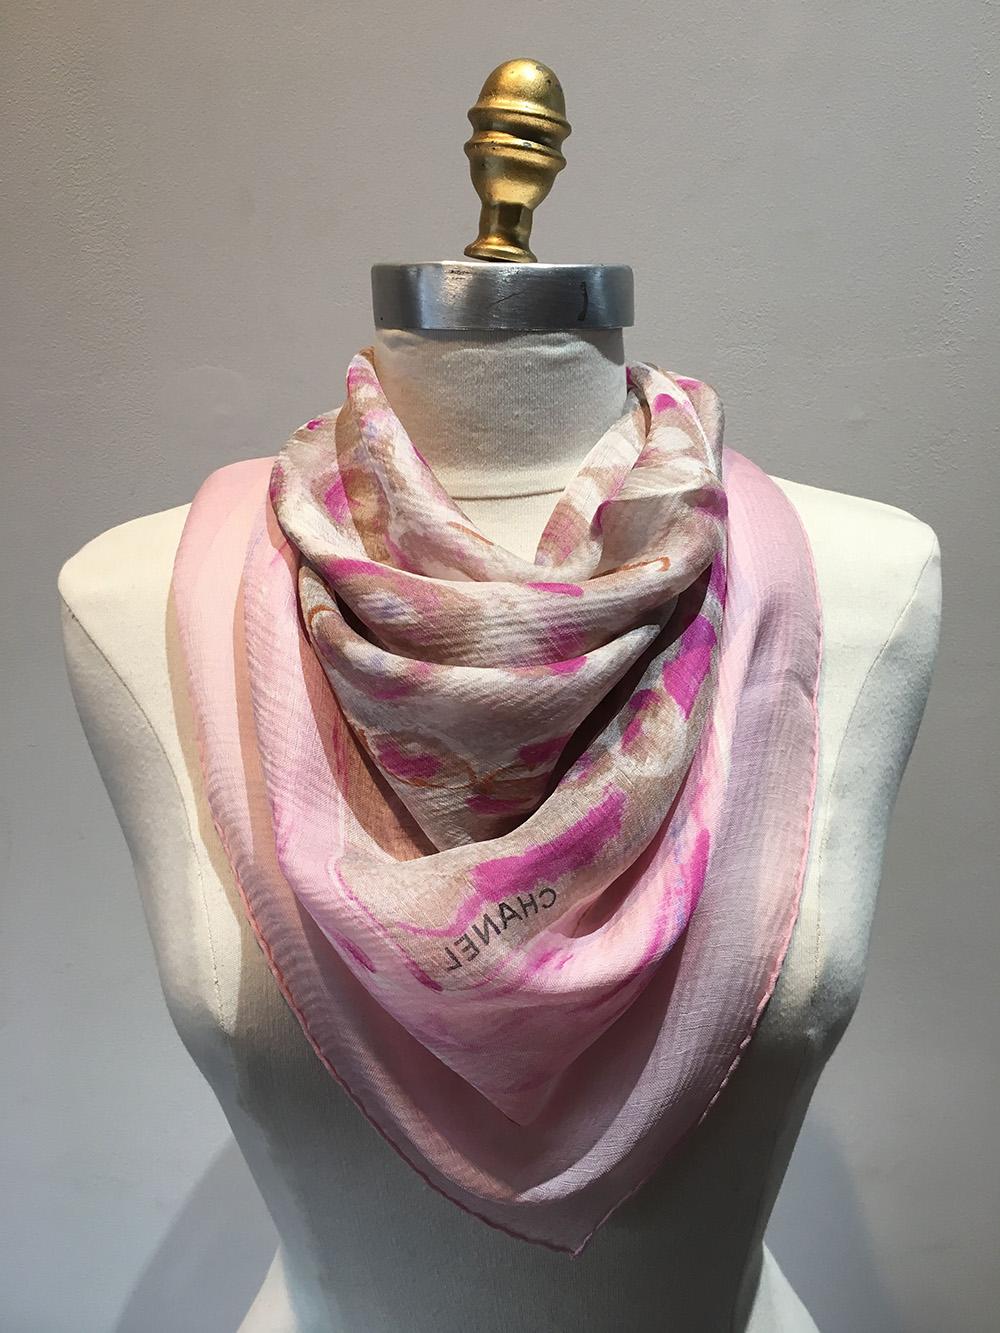 Chanel Sheer Pink Silk Scarf in excellent condition. Pale pink with dark pink, grey, white and blue abstract print. Chanel printed on each side. No stains smells or fabric pulls. Sheer silk. Measures 37